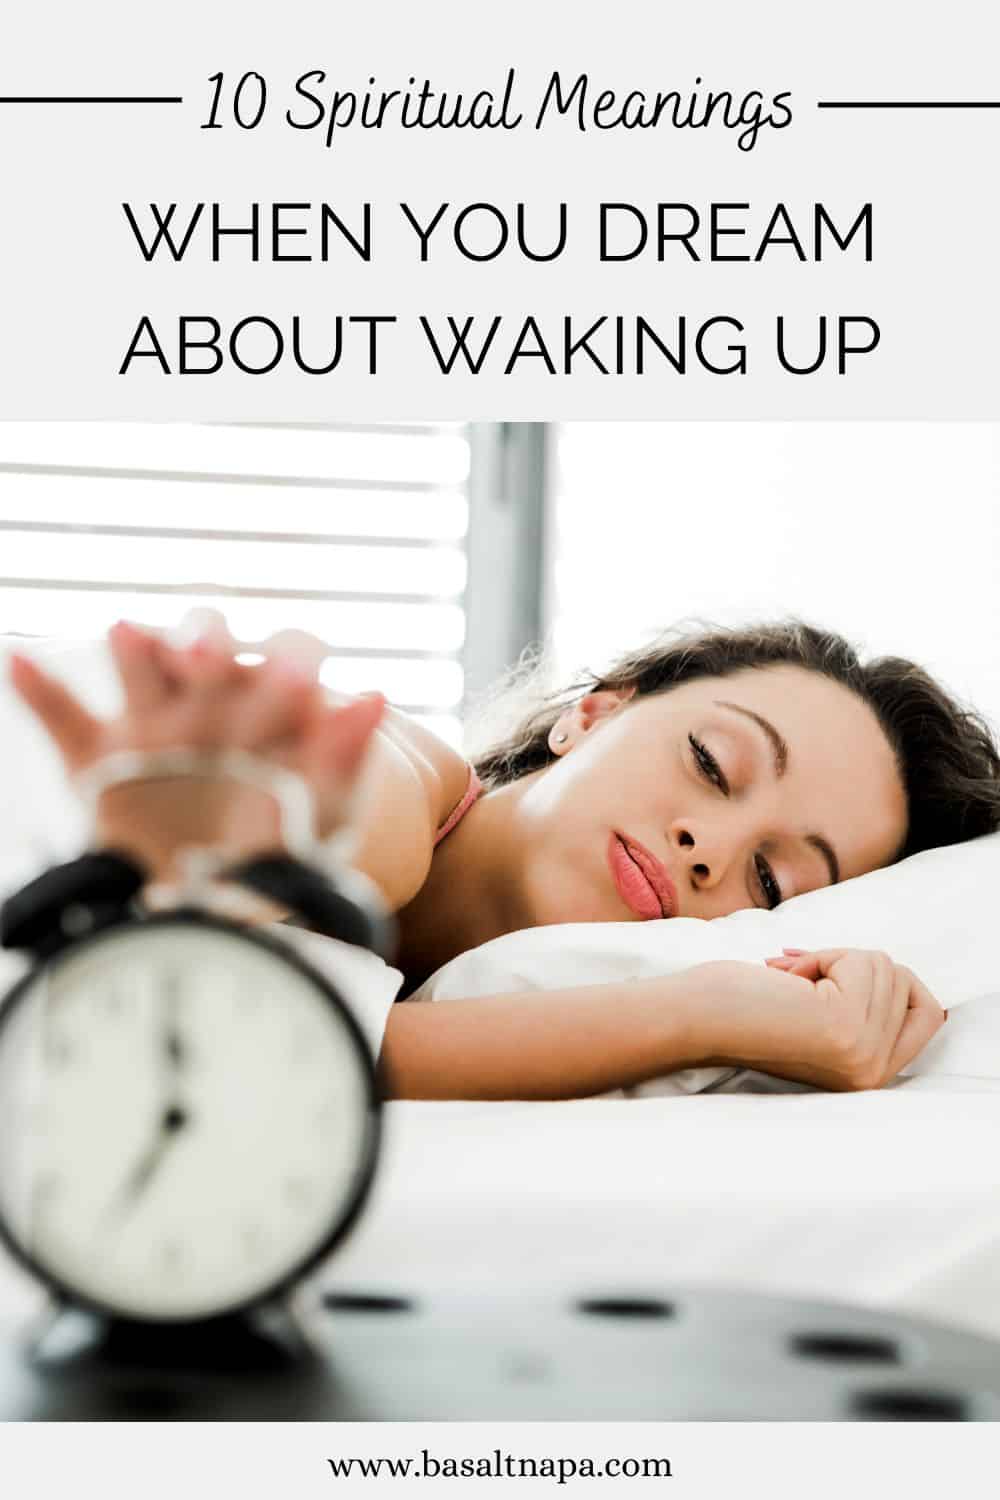 10 Spiritual Meanings When You Dream About Waking Up